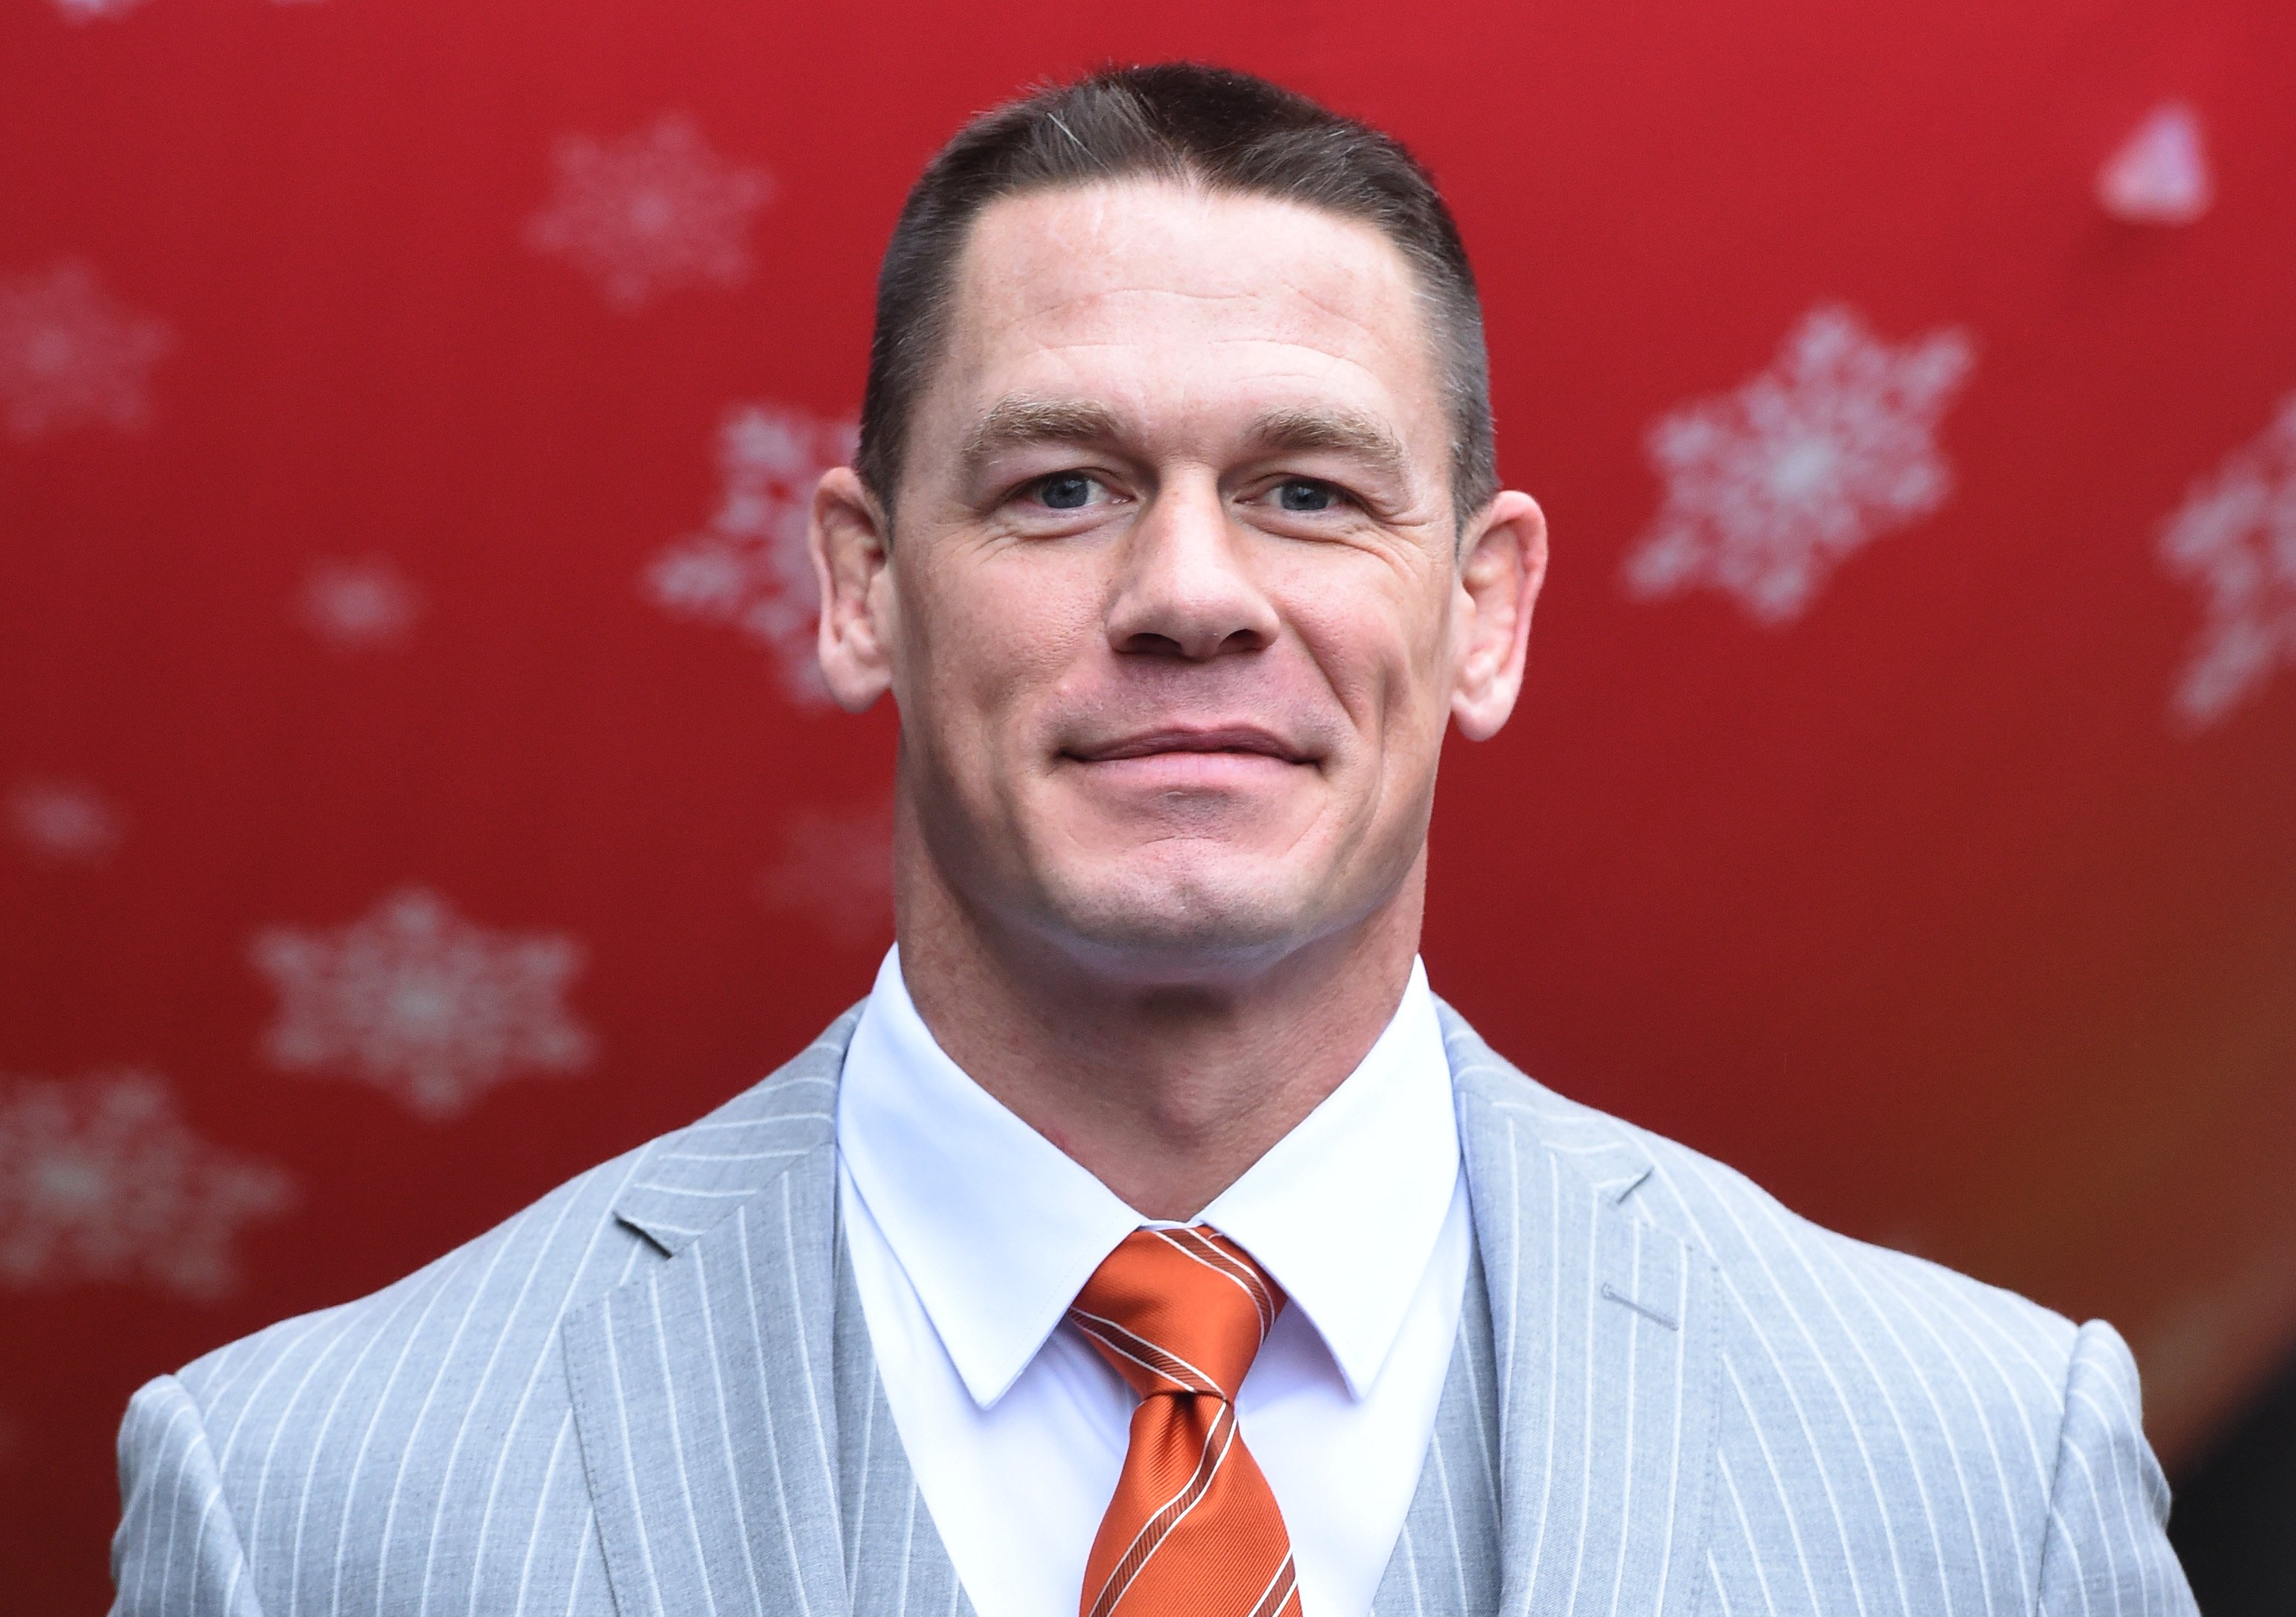 John Cena attends the 'Ferdinand' special screening on December 3, 2017 in London, England | Photo: Getty Images